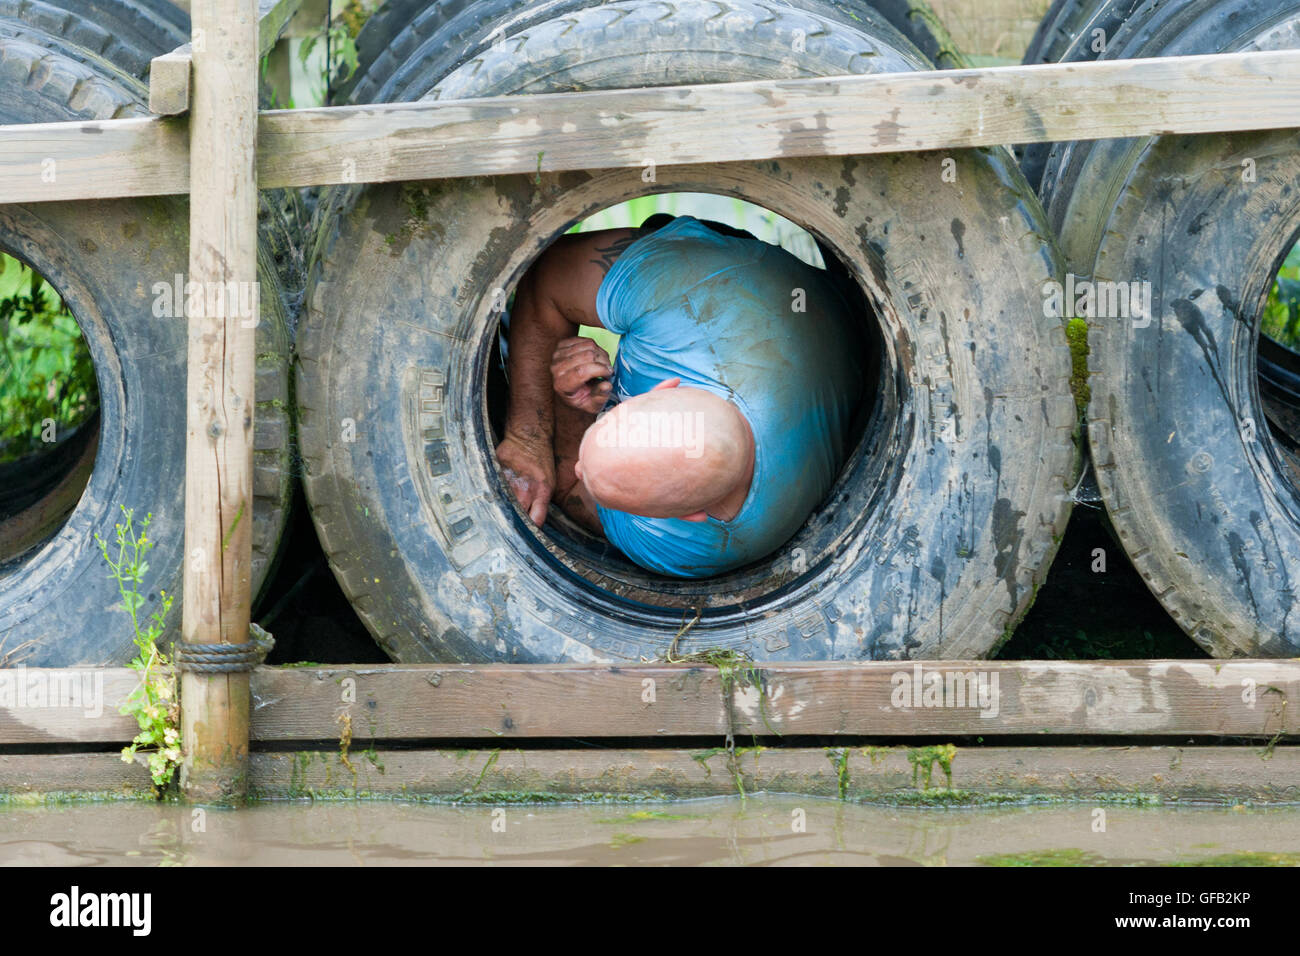 Tough Guy Nettle Warrior 2016 competitor, near Wolverhampton UK at the annual summer obstacle course Stock Photo